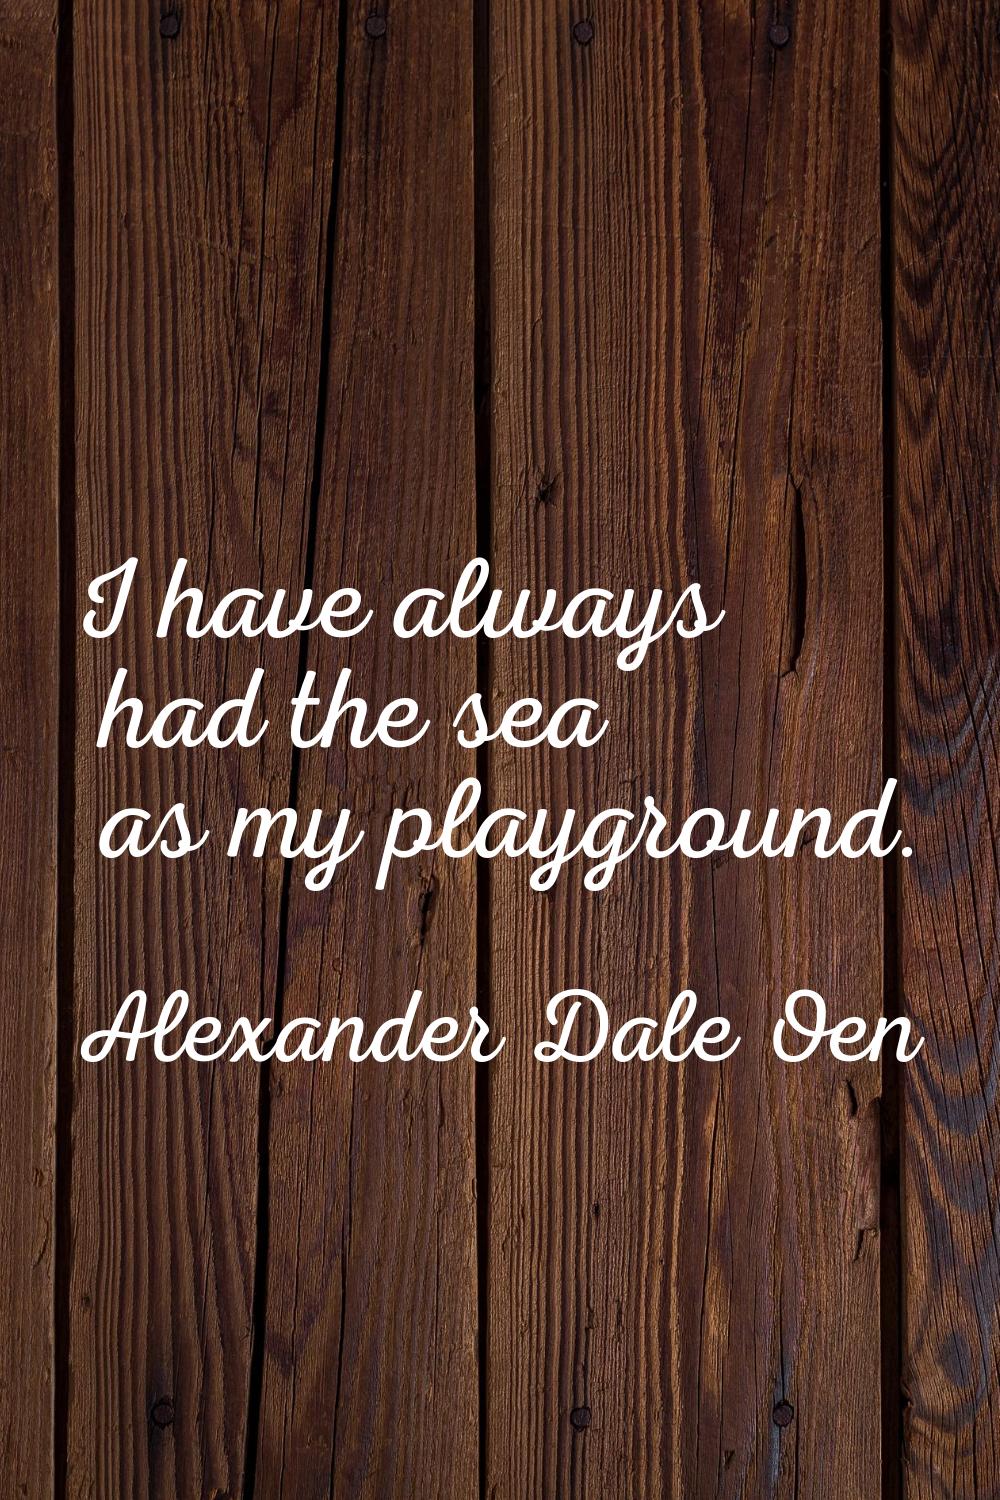 I have always had the sea as my playground.